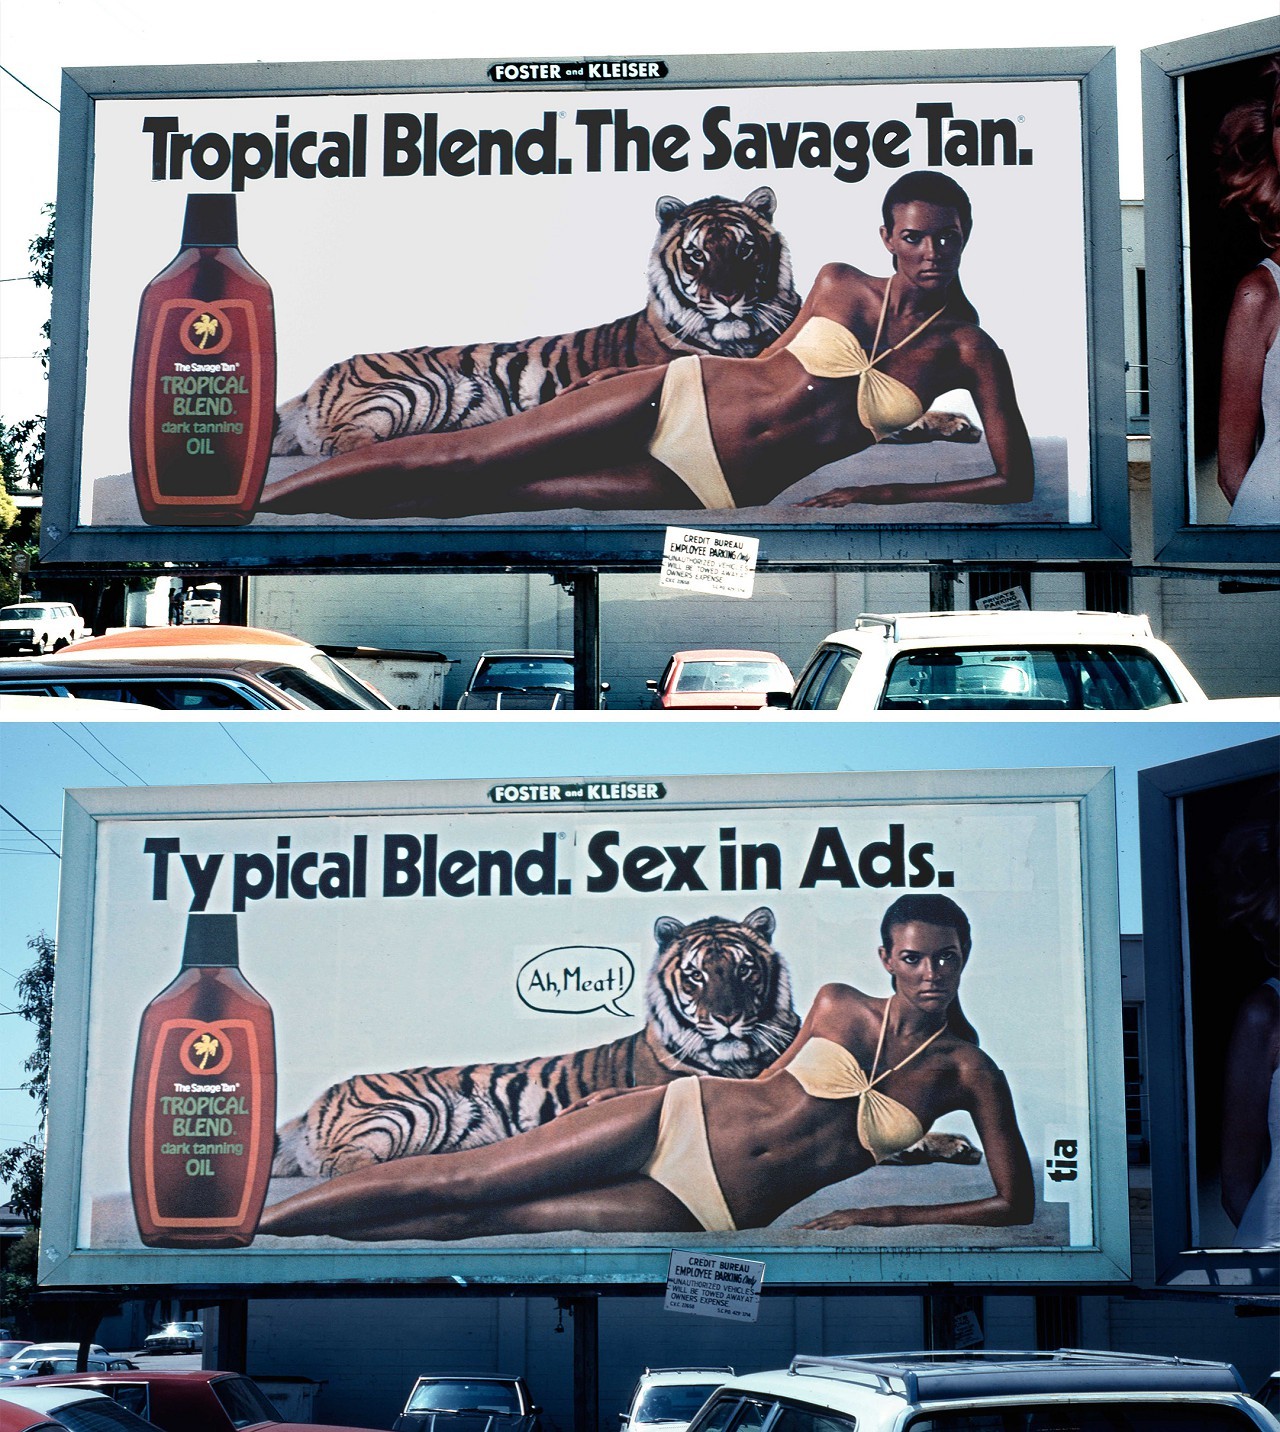 1981 Truth in Advertising - Sex in ads